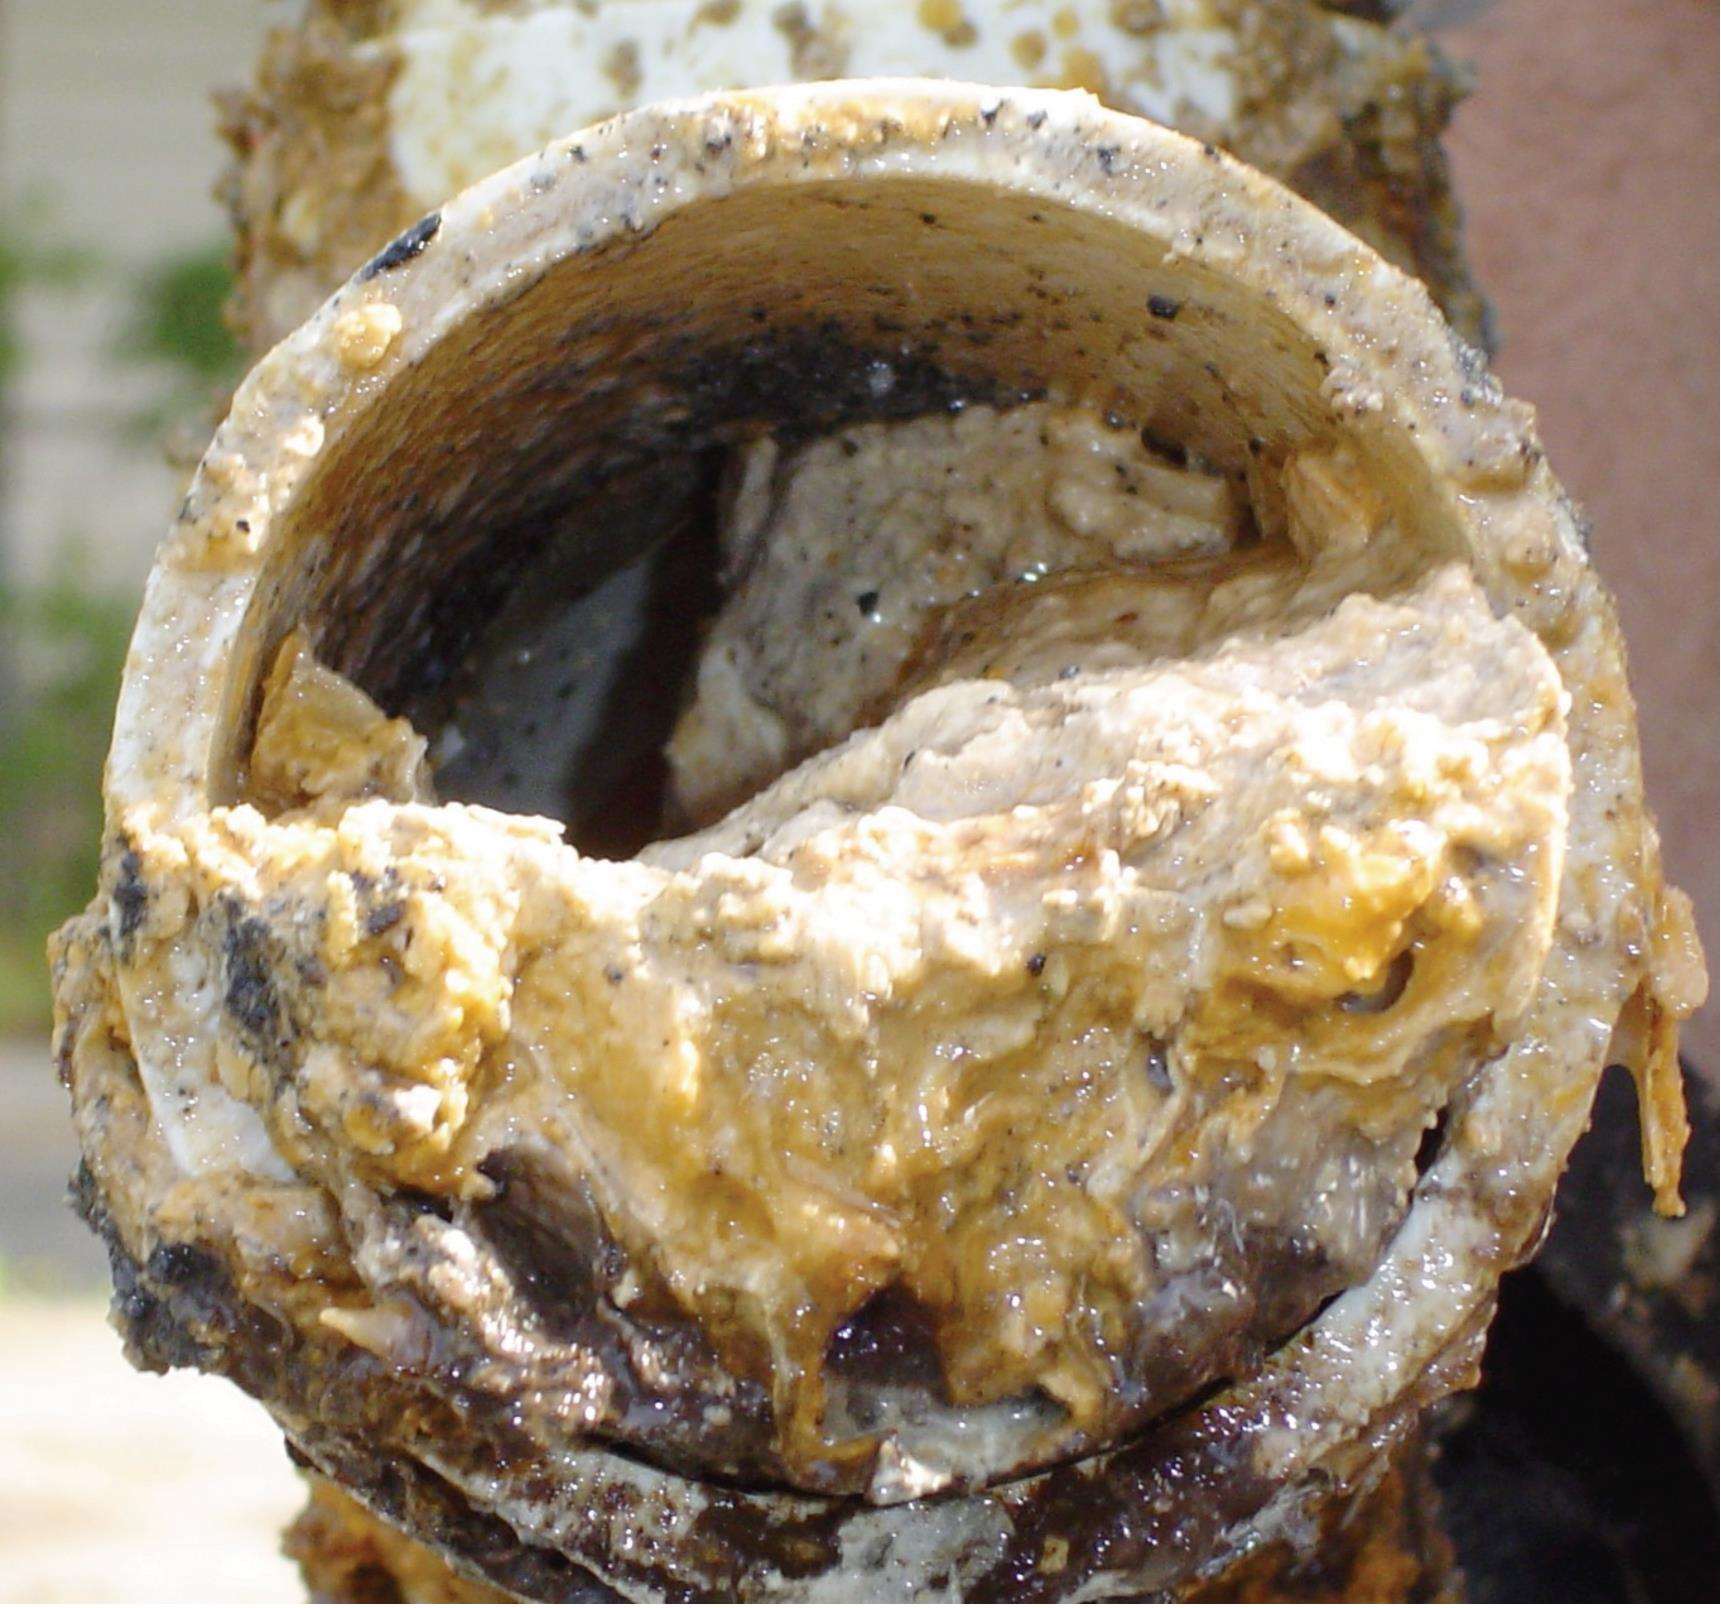 Southern Water's facility purifies wastewater, which can clog pipes with fat. (3841849)